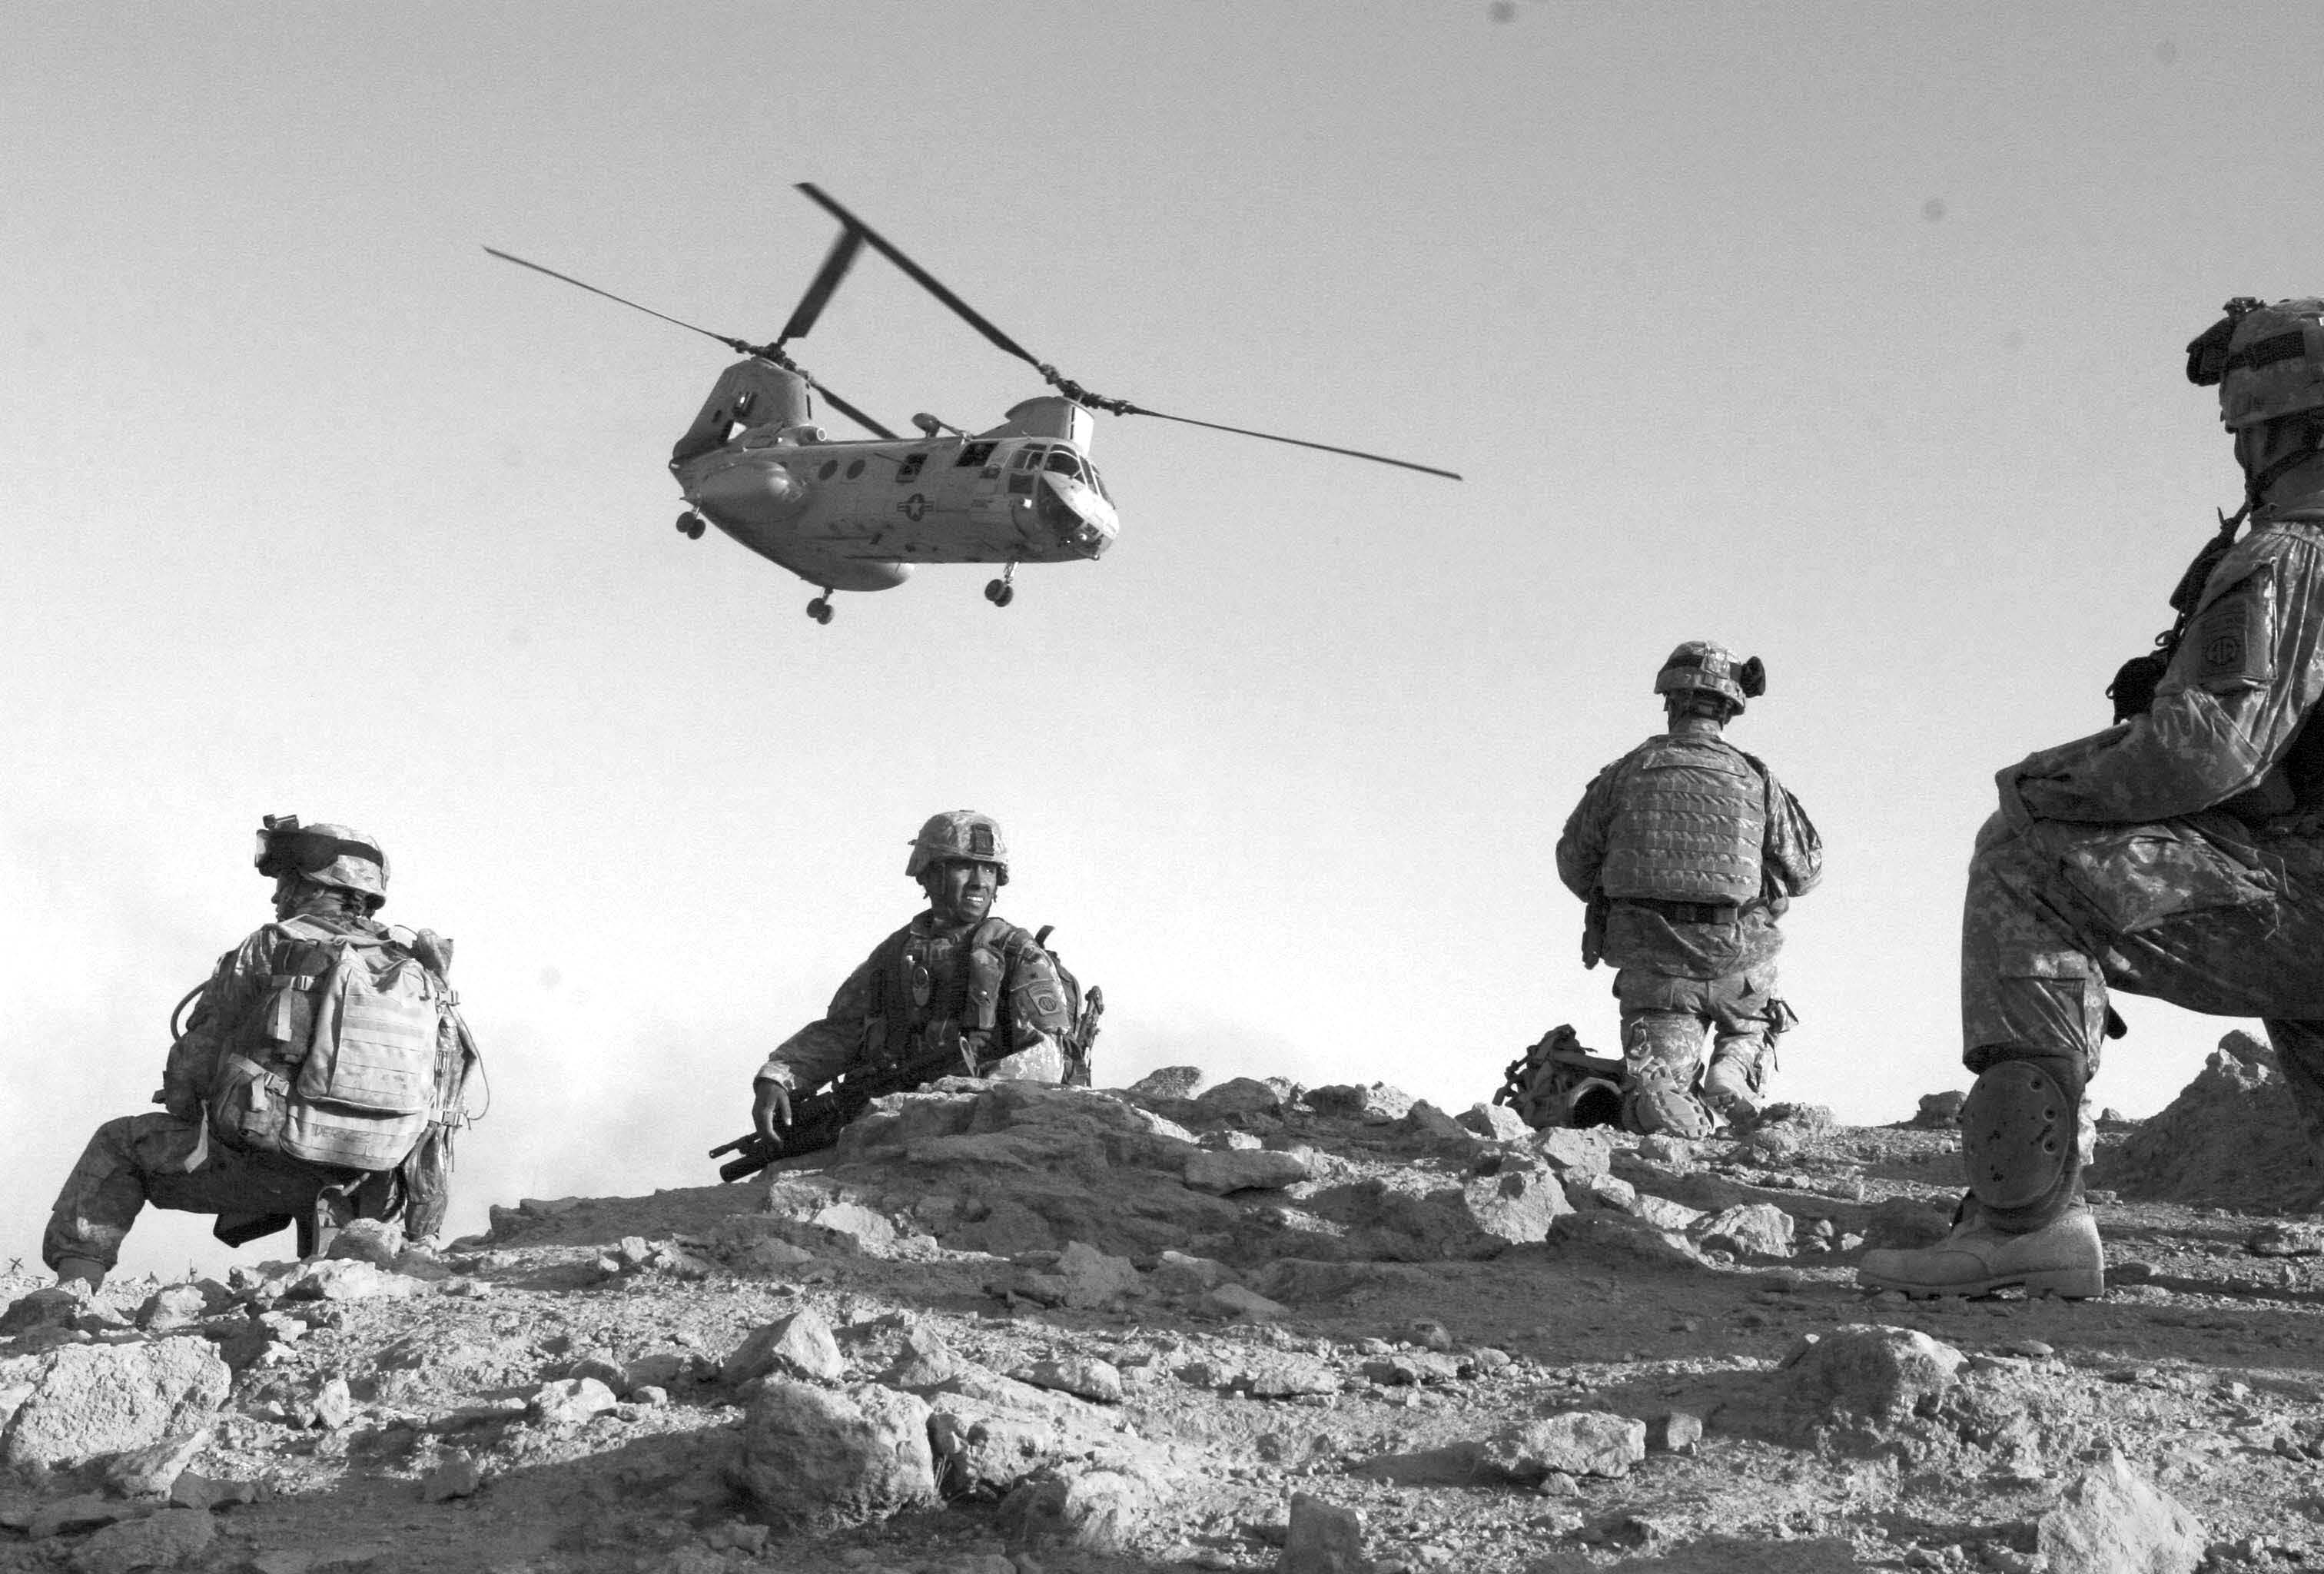 U.S. soldiers awaiting helicopter transport. Courtesy of DoD.